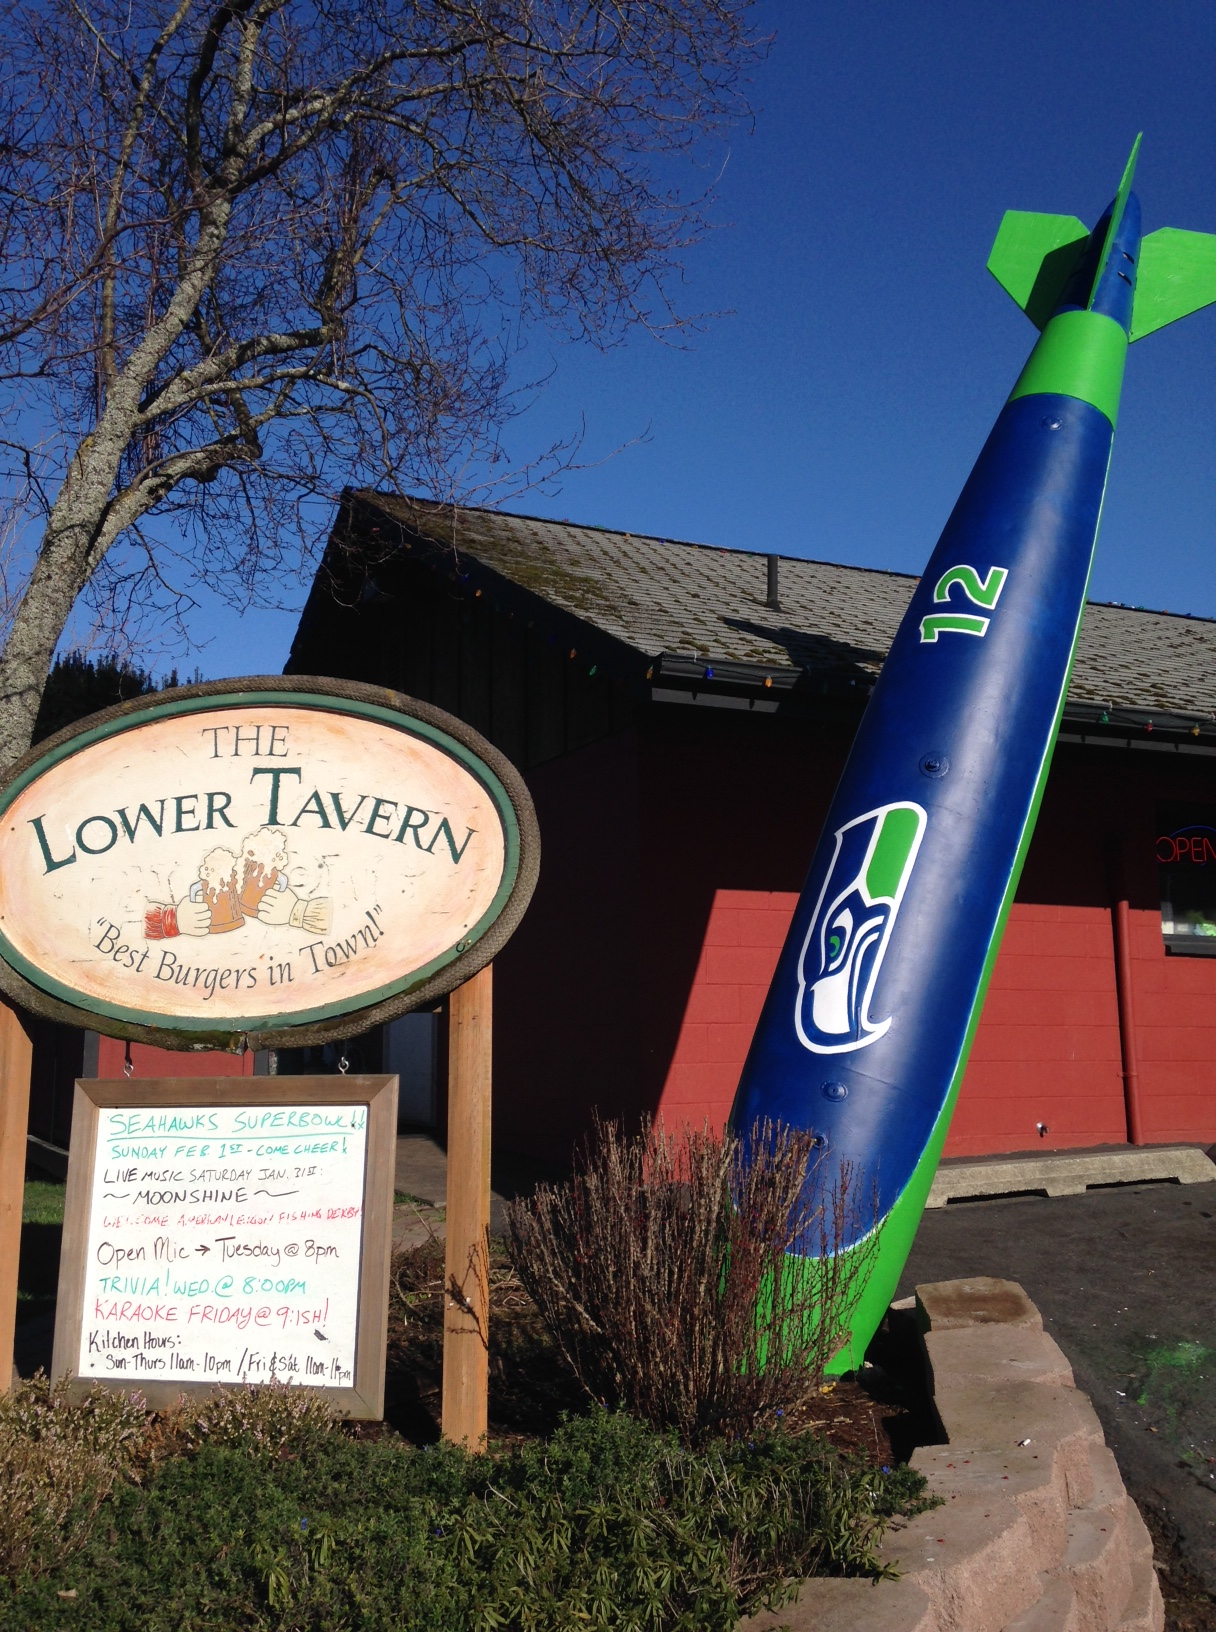 Good food, game day fun and plenty of cold beer to cheer on the Seahawks!